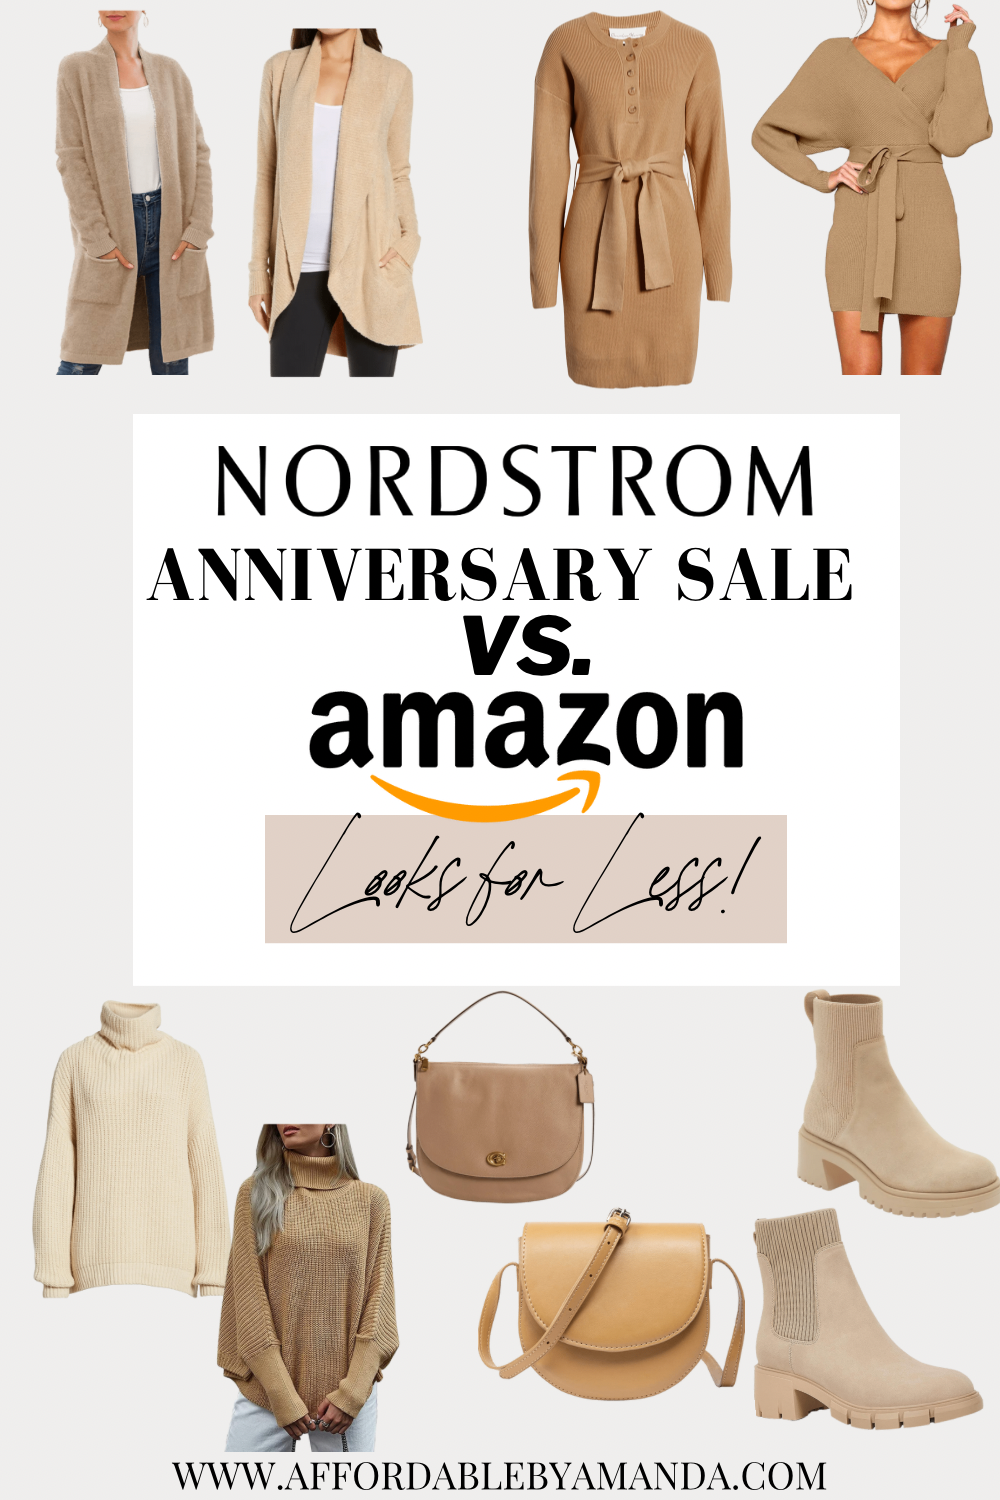 Nordstrom Anniversary Sale Looks for Less